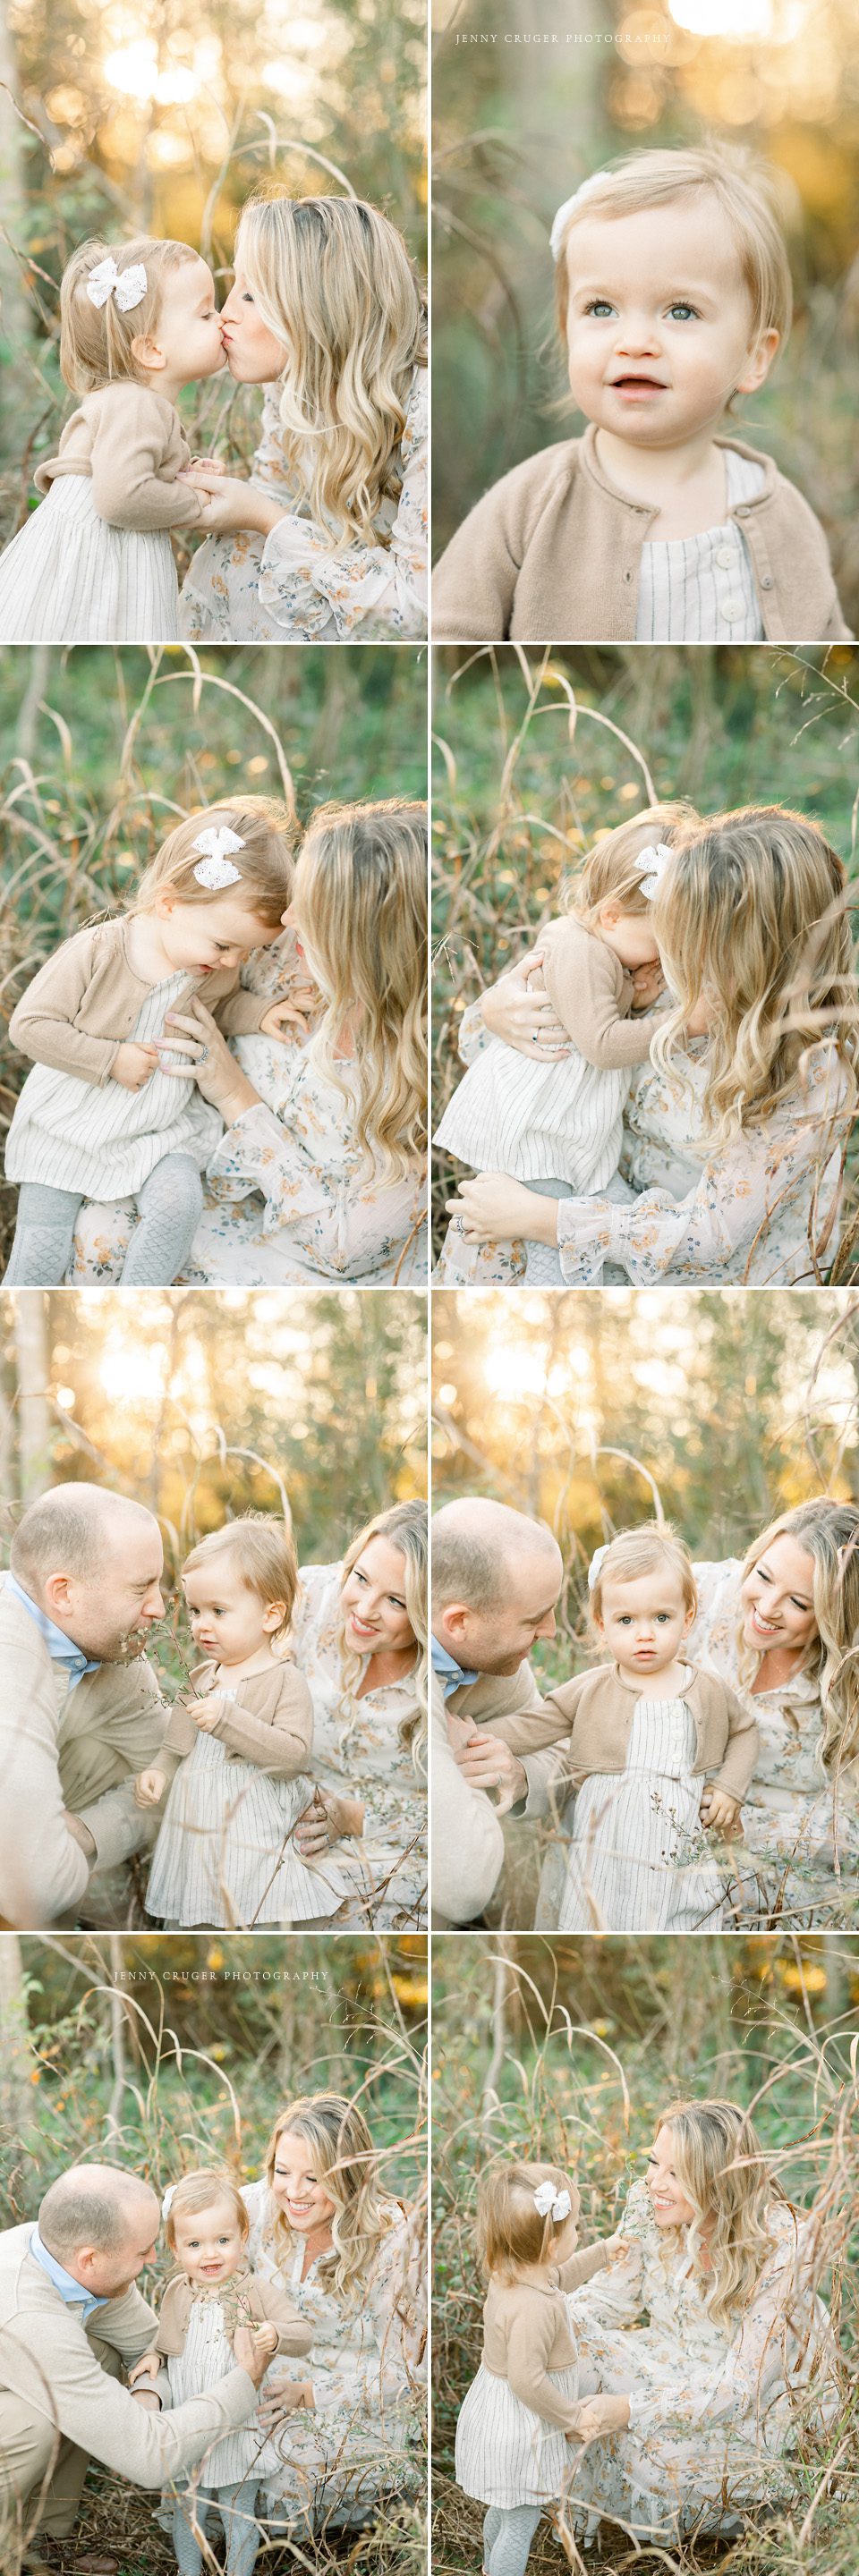 Nashville Family Photography in fall field